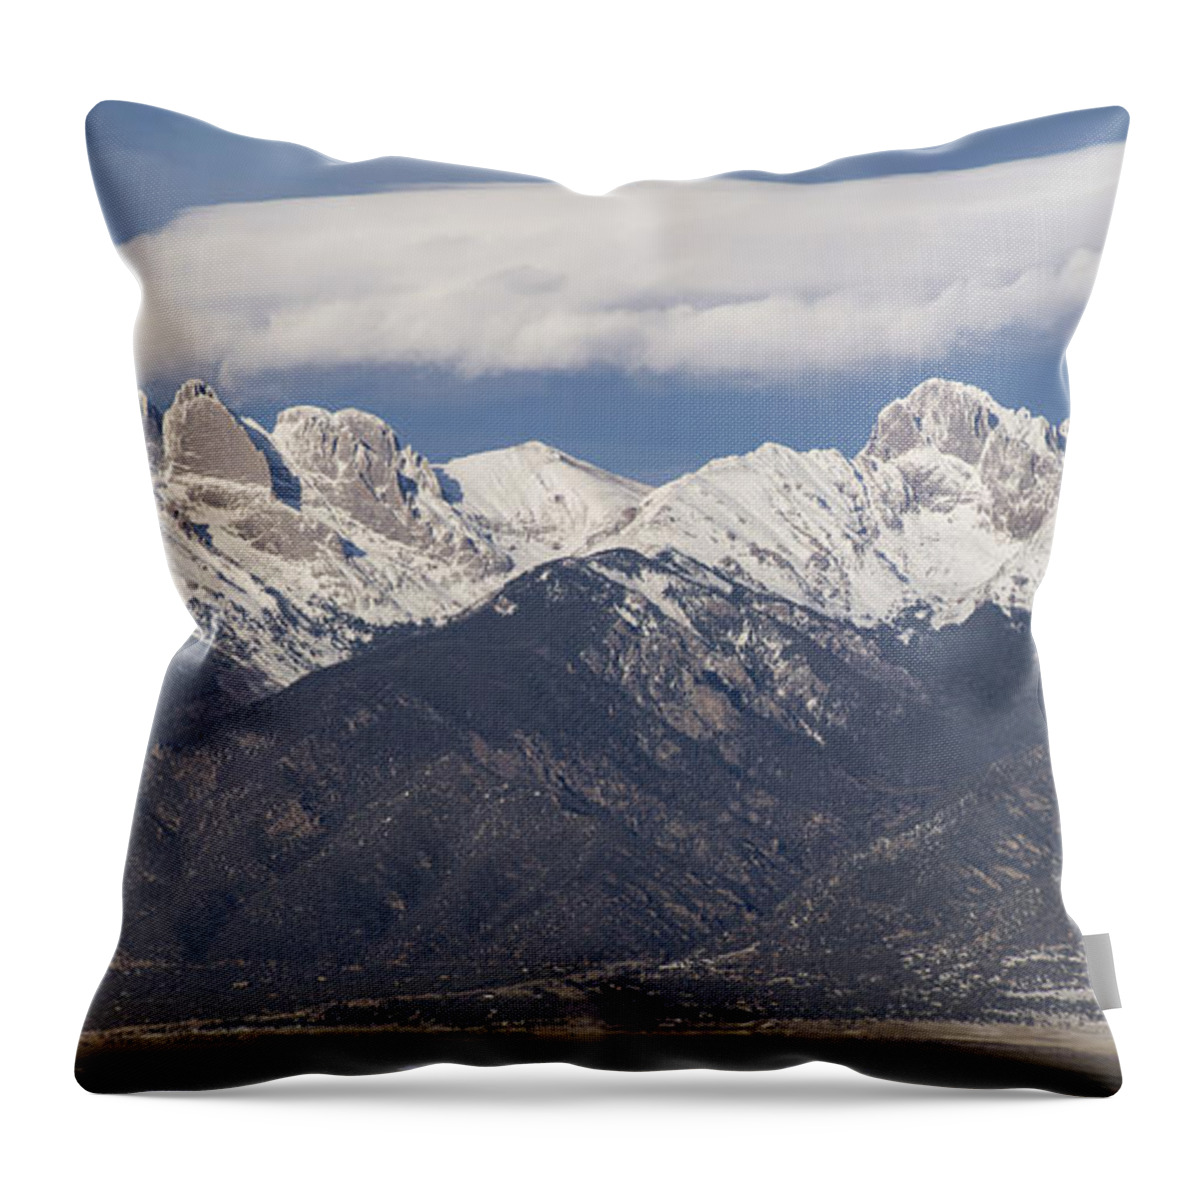 Crestones Throw Pillow featuring the photograph 14er Panorama by Aaron Spong